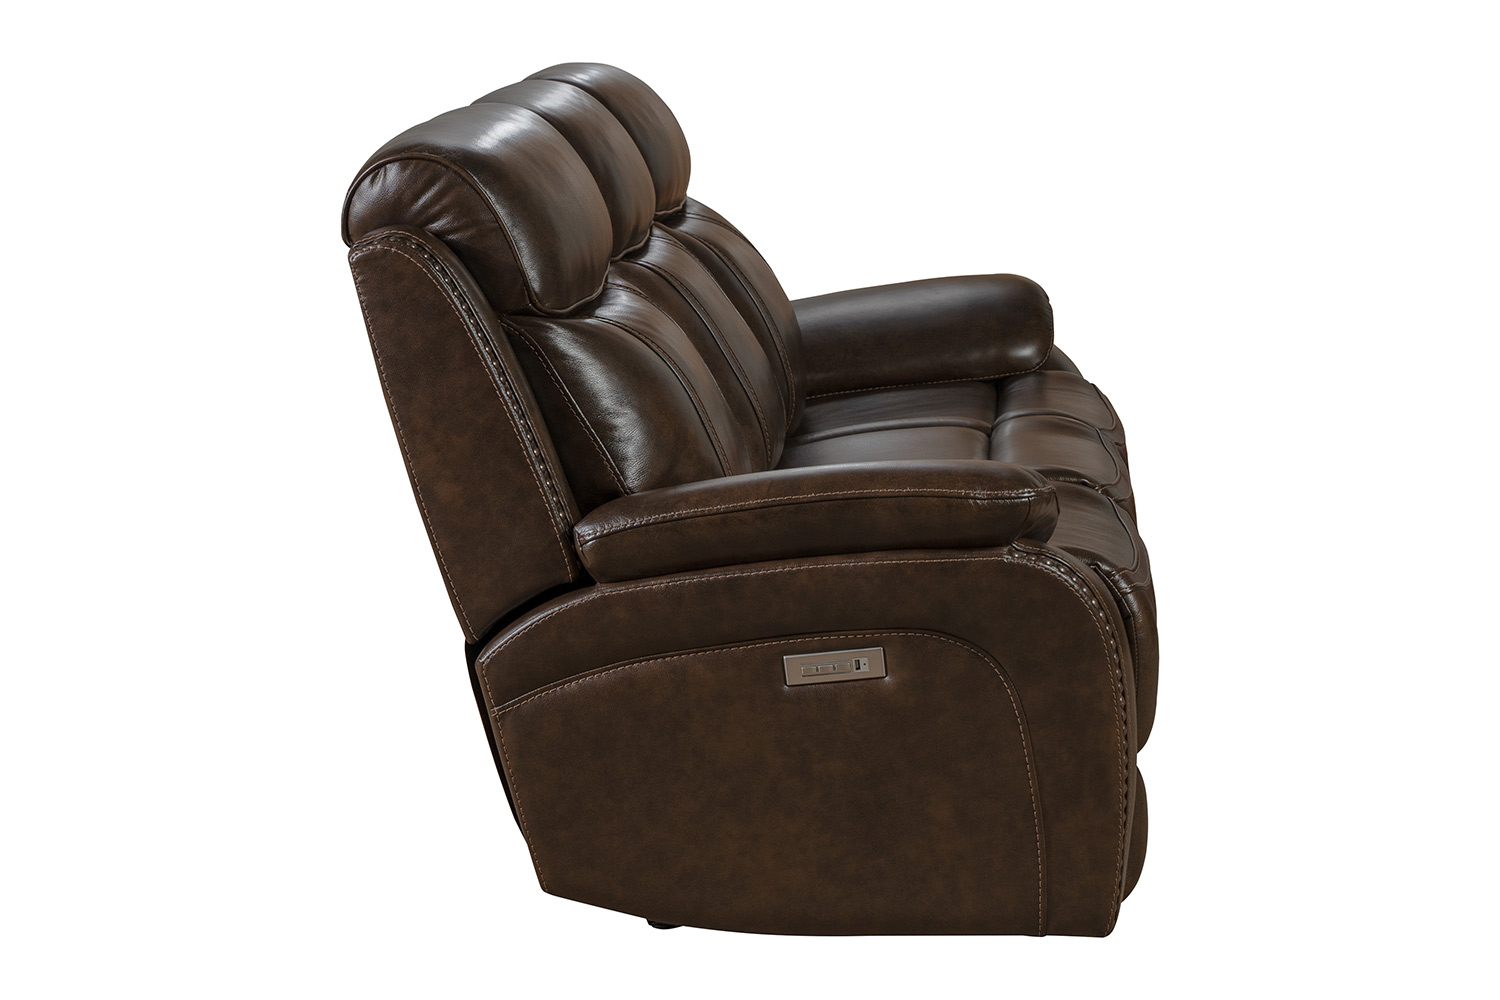 Barcalounger Sandover Power Reclining Sofa with Power Head Rests and Lumbar - Tri-Tone Chocolate/Leather match